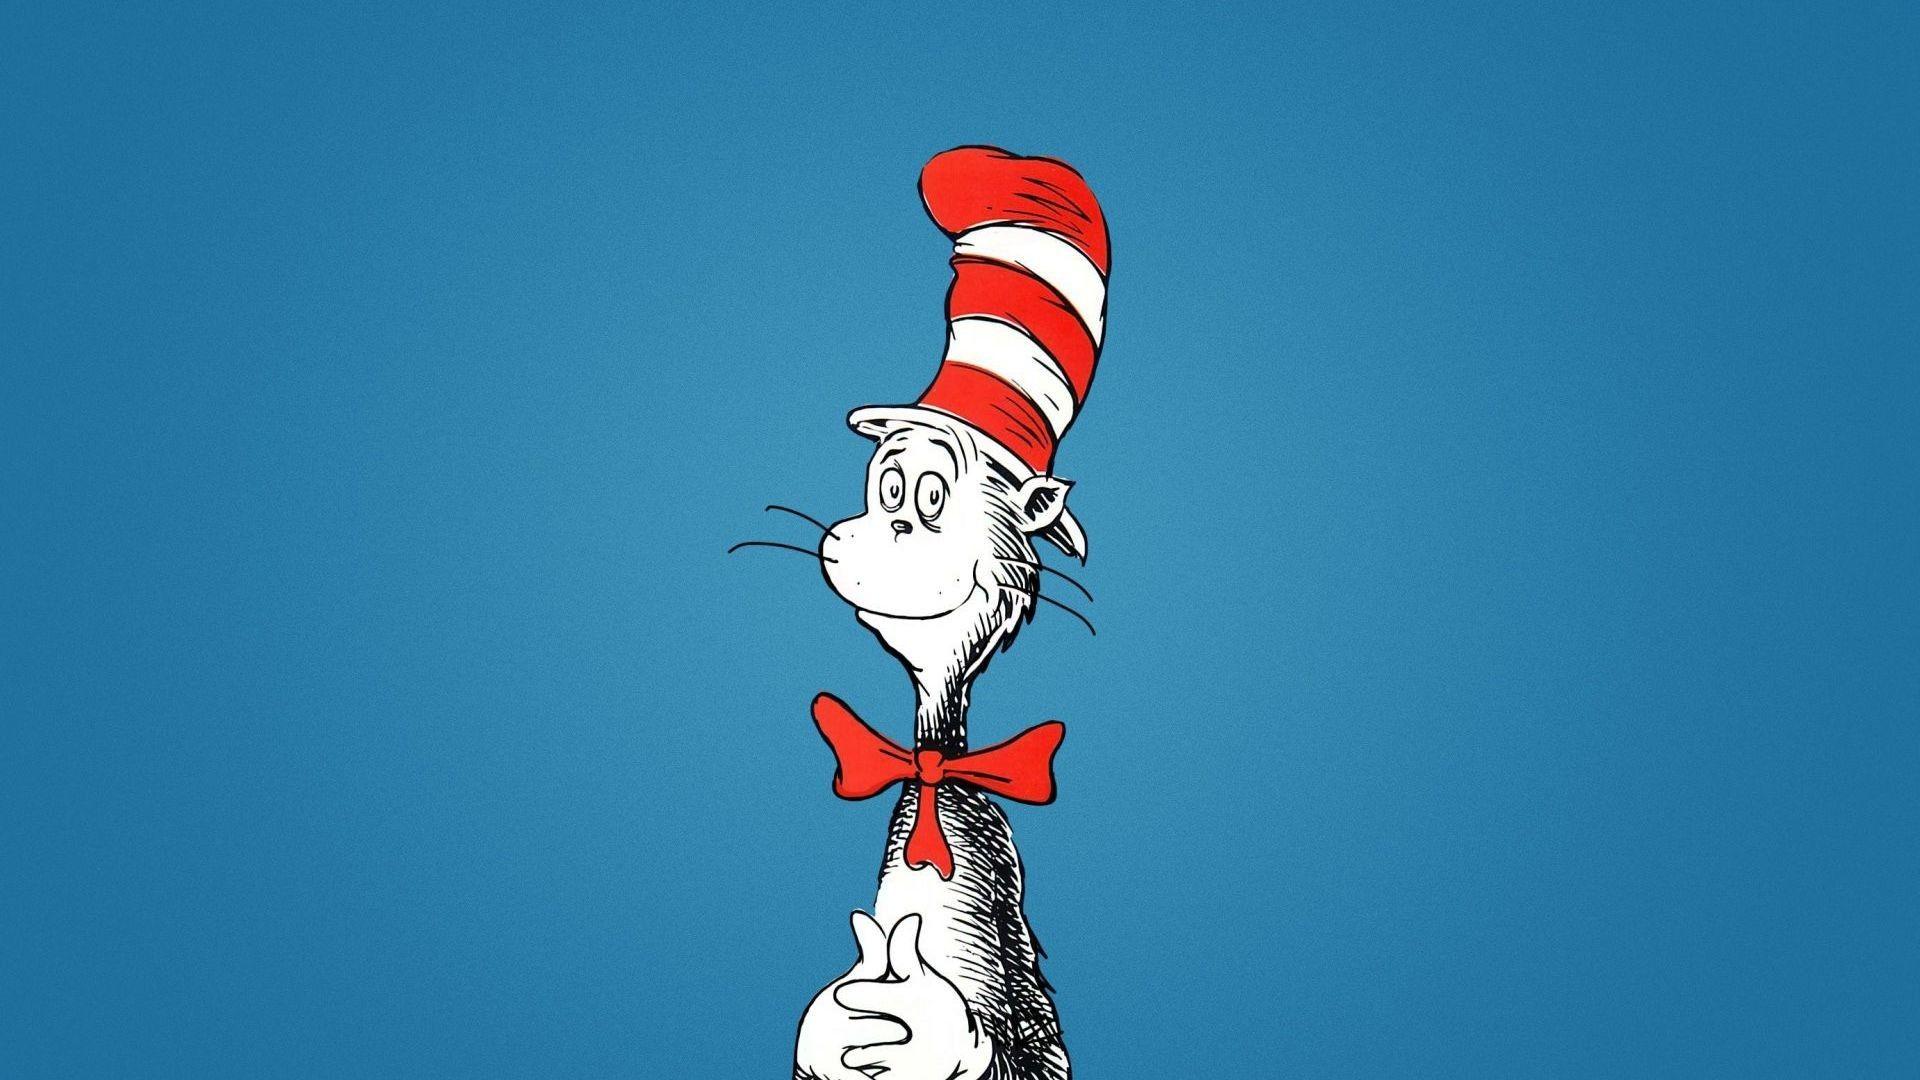 The Cat In The Hat Wallpaper Background Cat In The Hat Pictures Background  Image And Wallpaper for Free Download